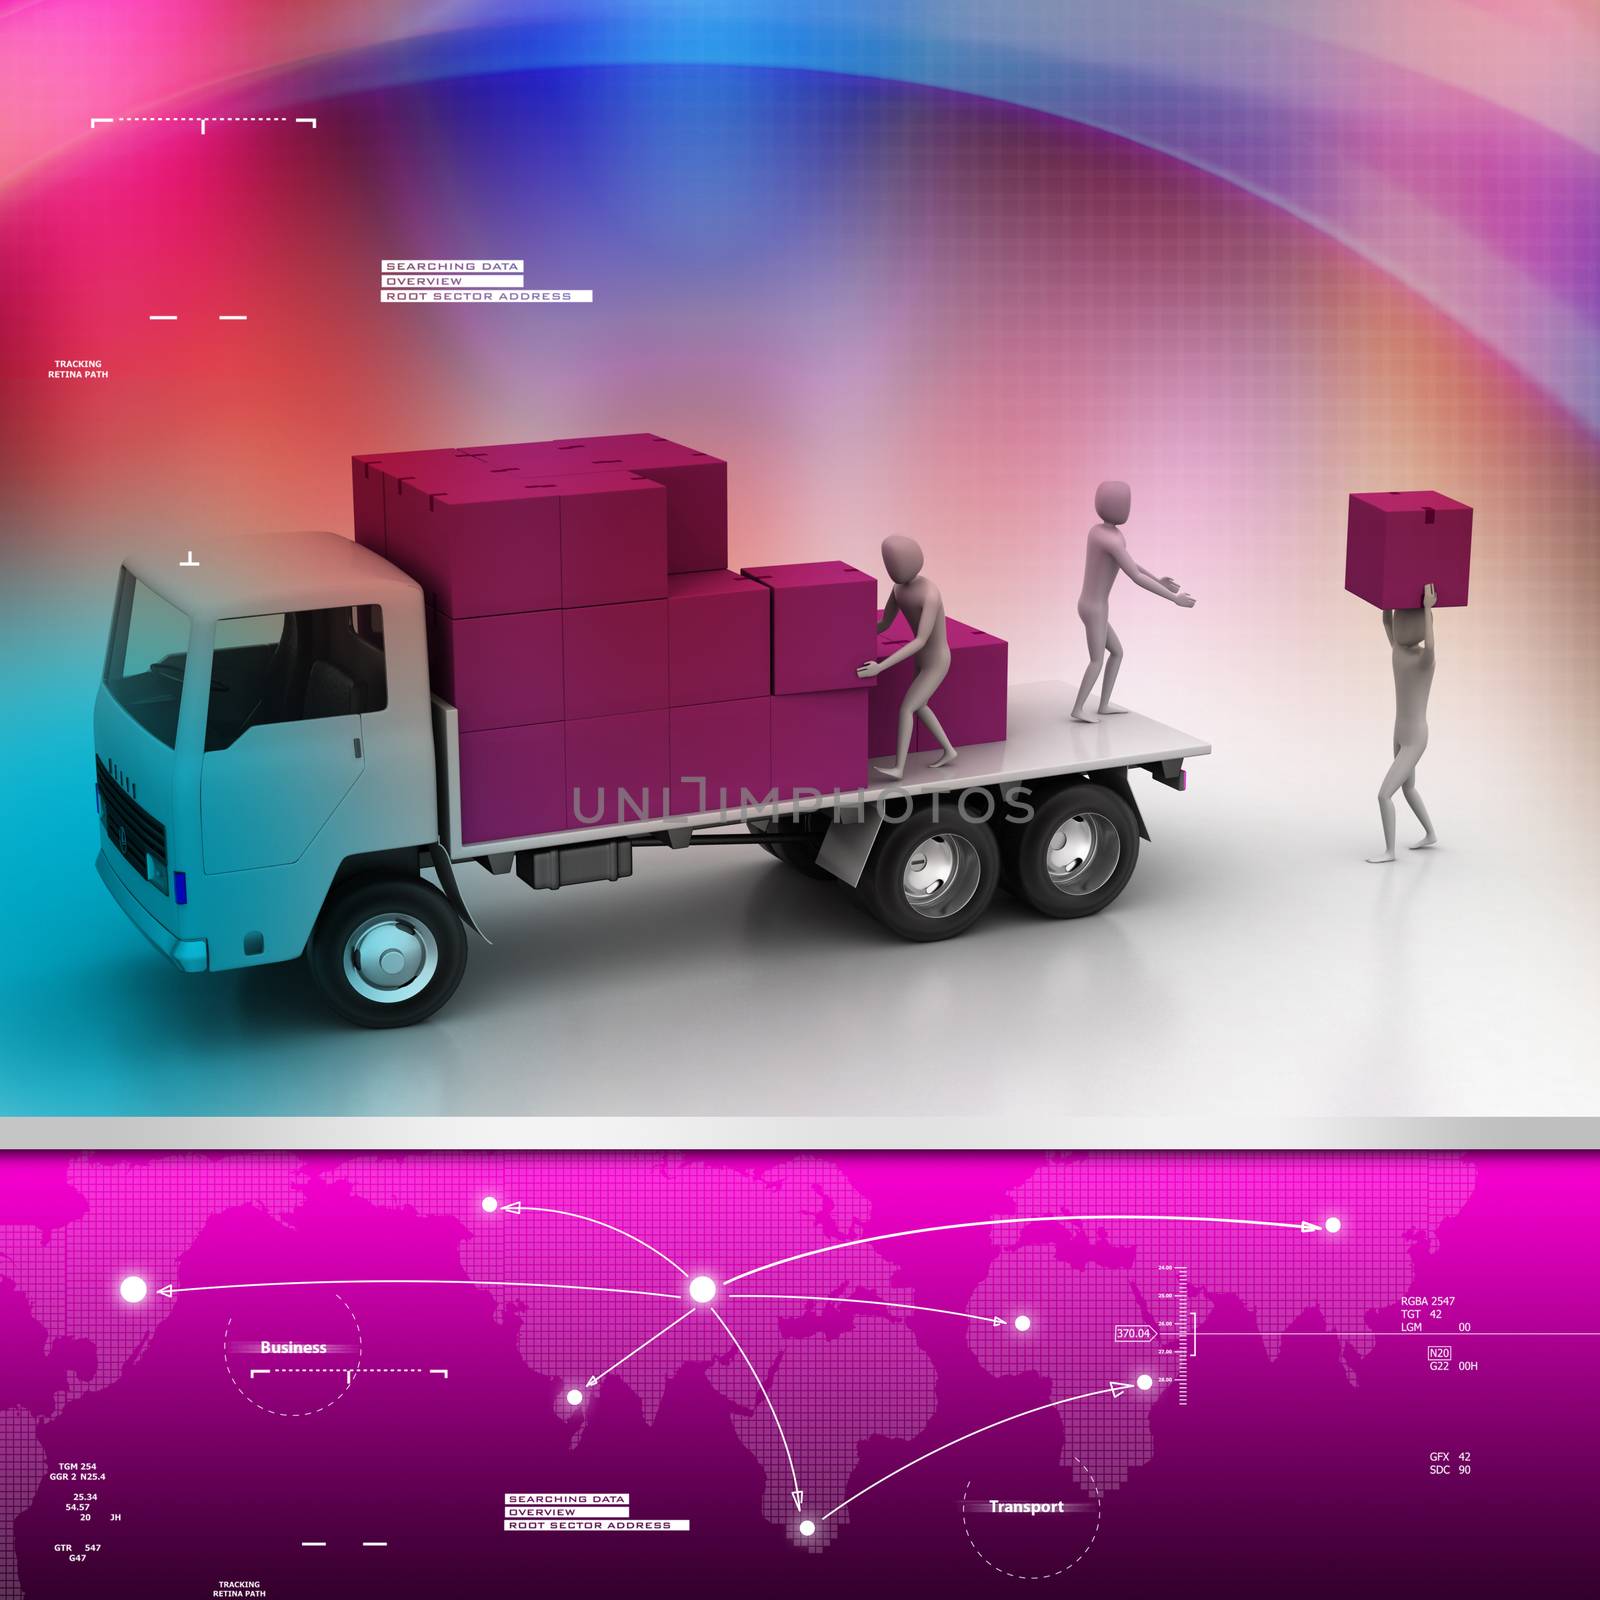 Transportation trucks in freight delivery by cuteimage